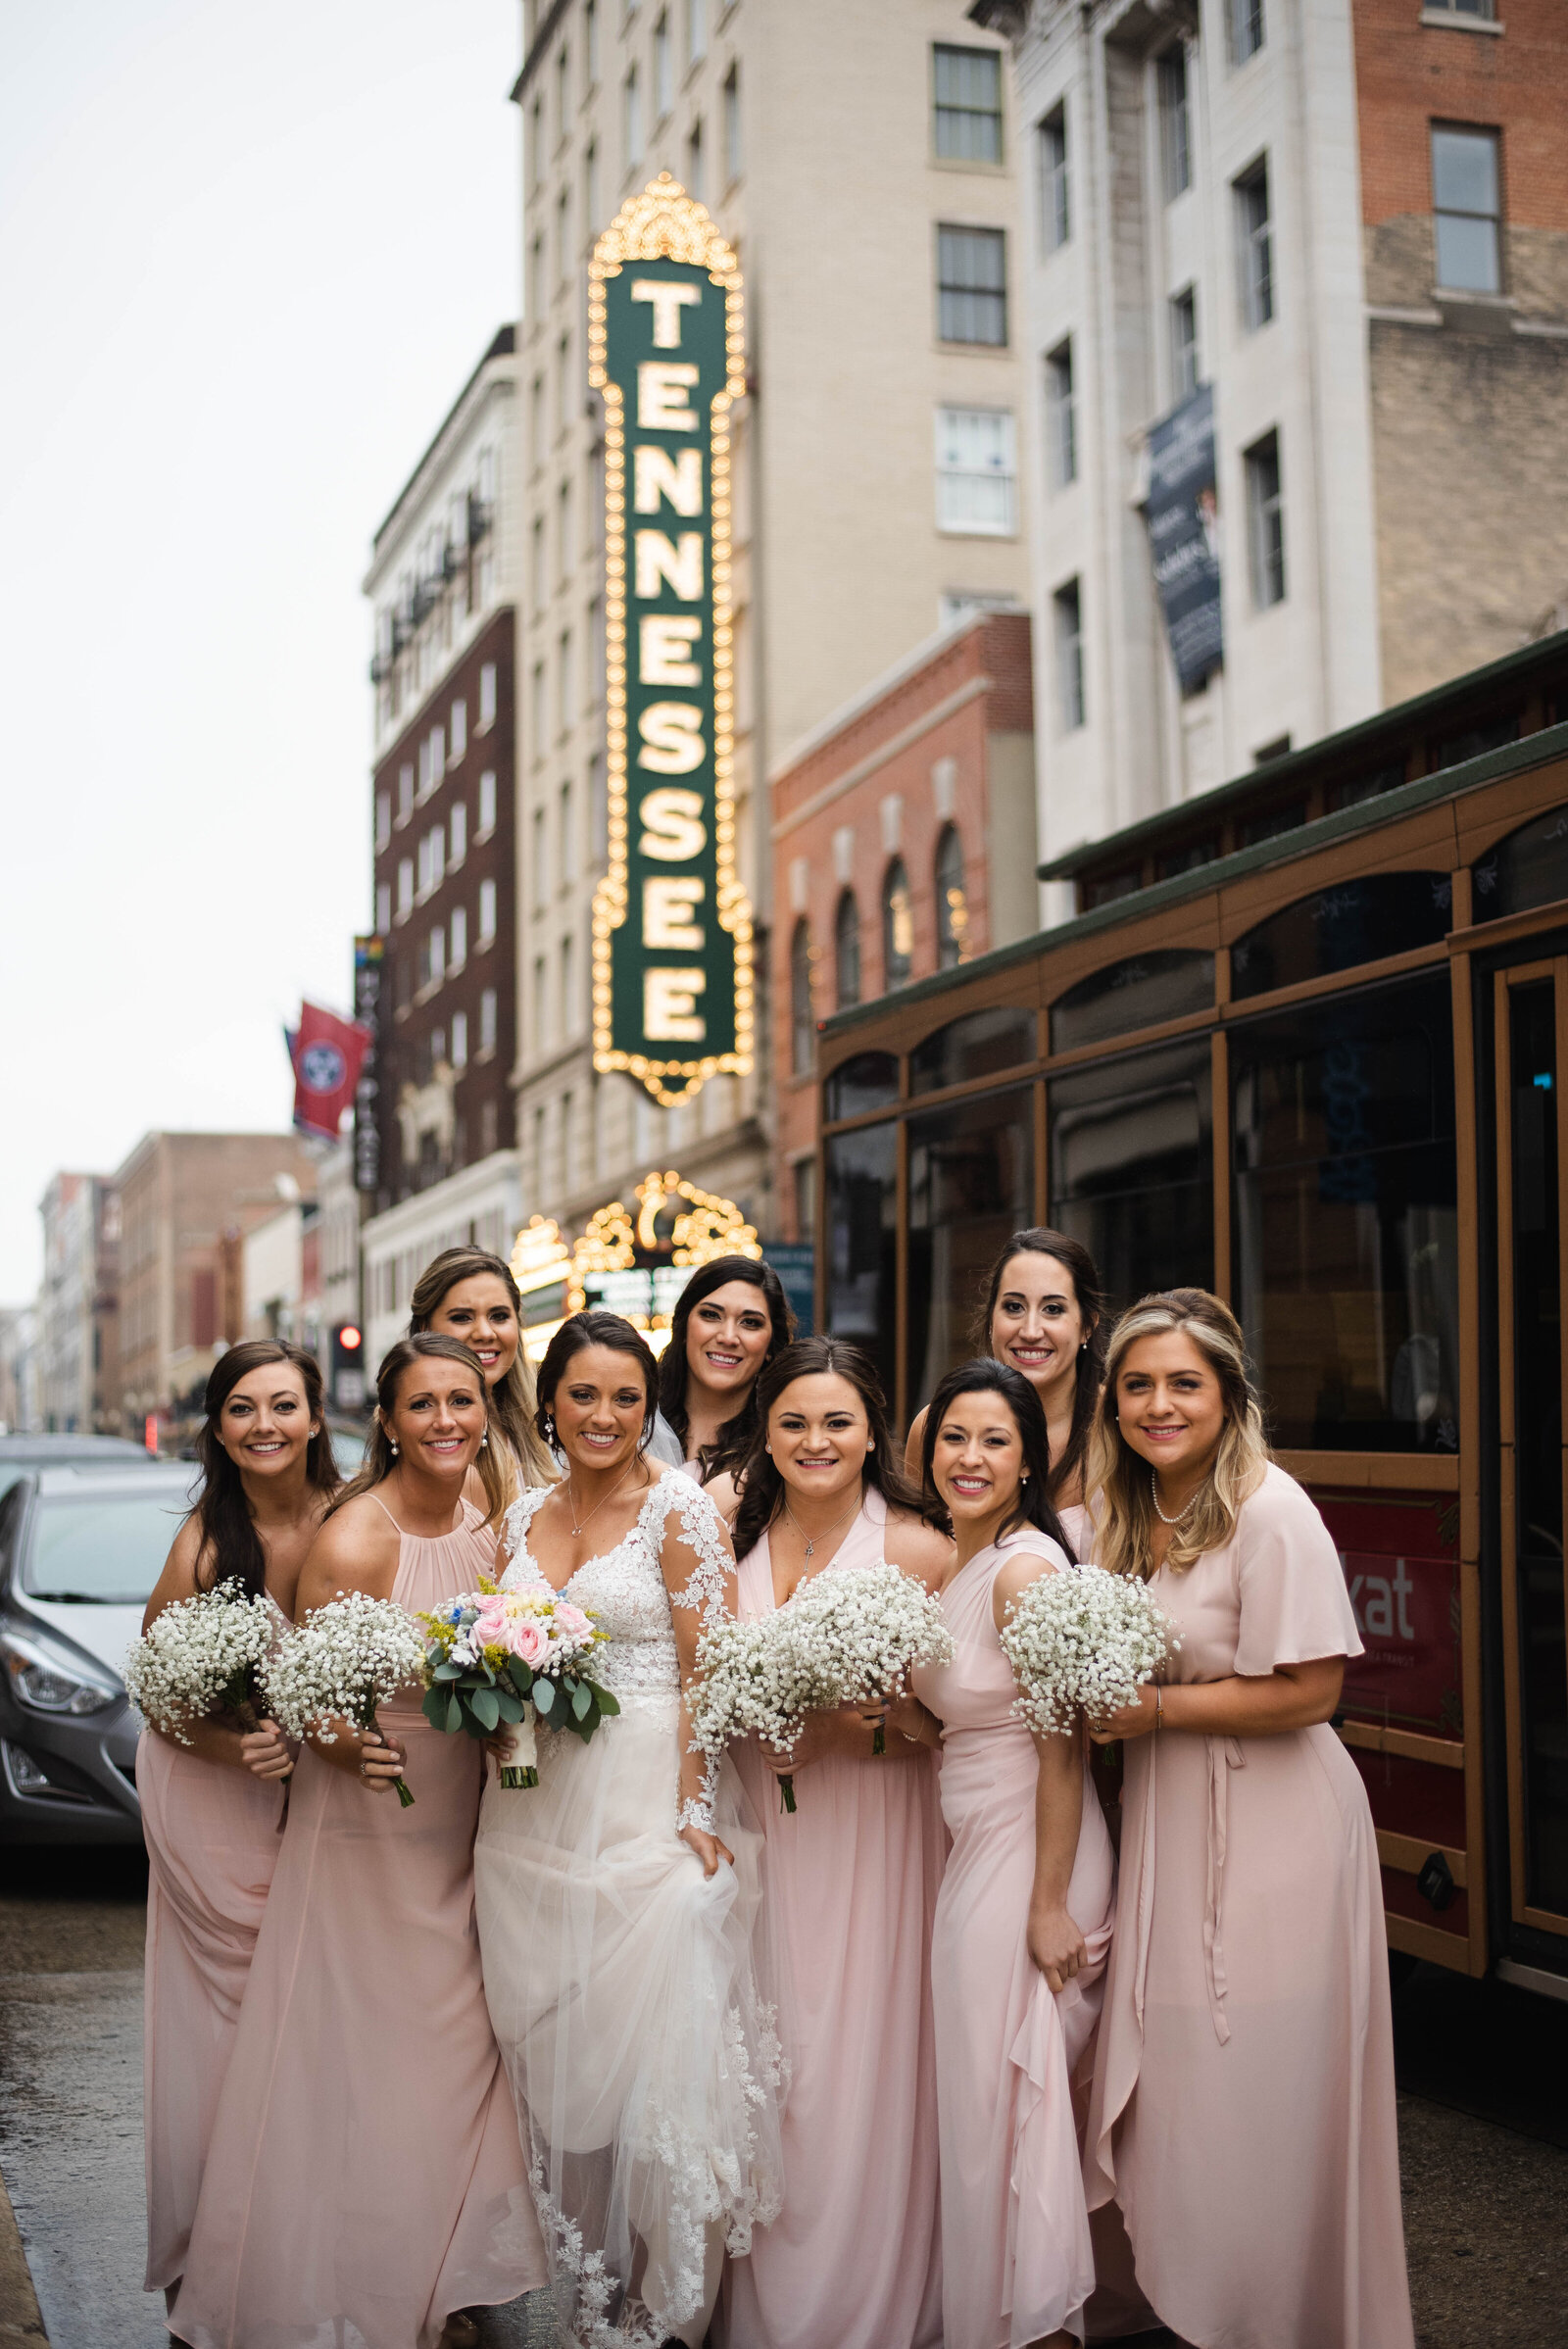 Bridesmaids in downtown Knoxville TN photo by Jaimie Renee